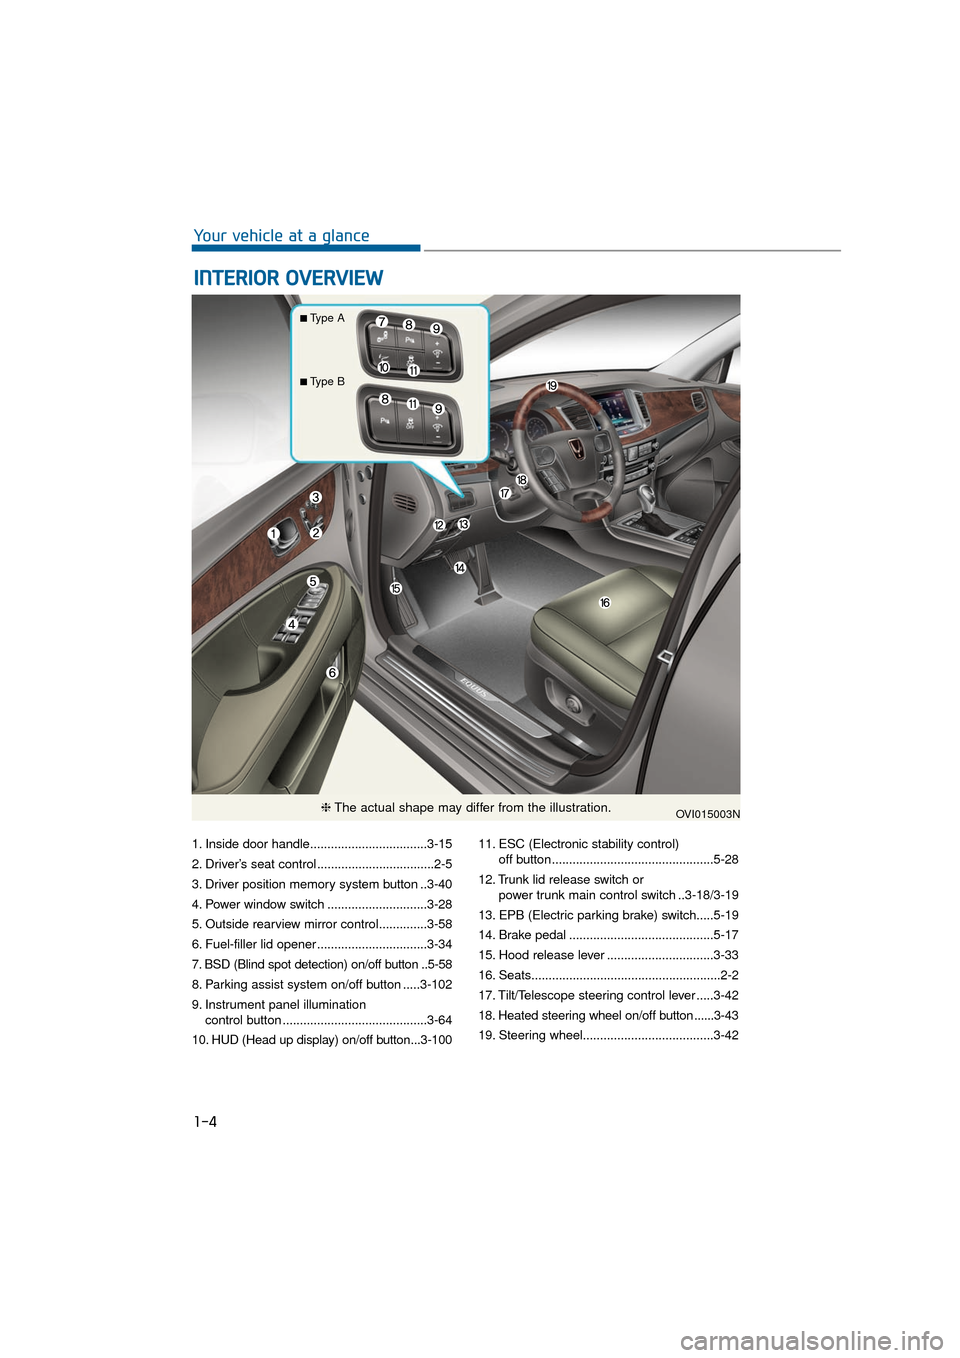 Hyundai Equus 2016  Owners Manual 1. Inside door handle..................................3-15
2. Driver’s seat control ..................................2-5
3. Driver position memory system button ..3-40
4. Power window switch .....